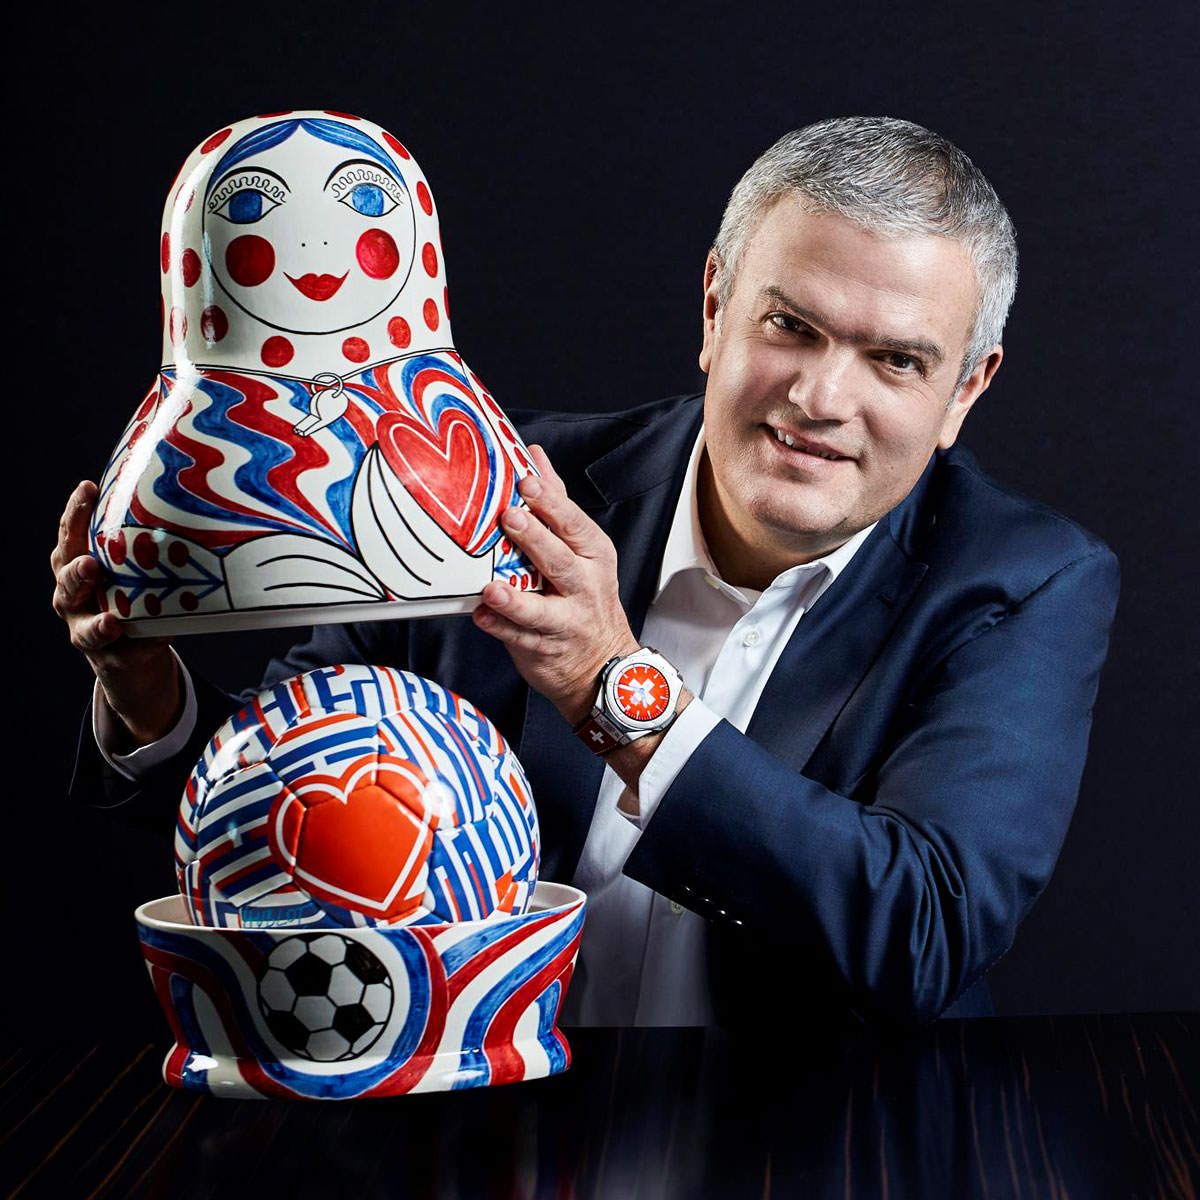 Hublot Gears Up For The 2018 FIFA World Cup In Russia